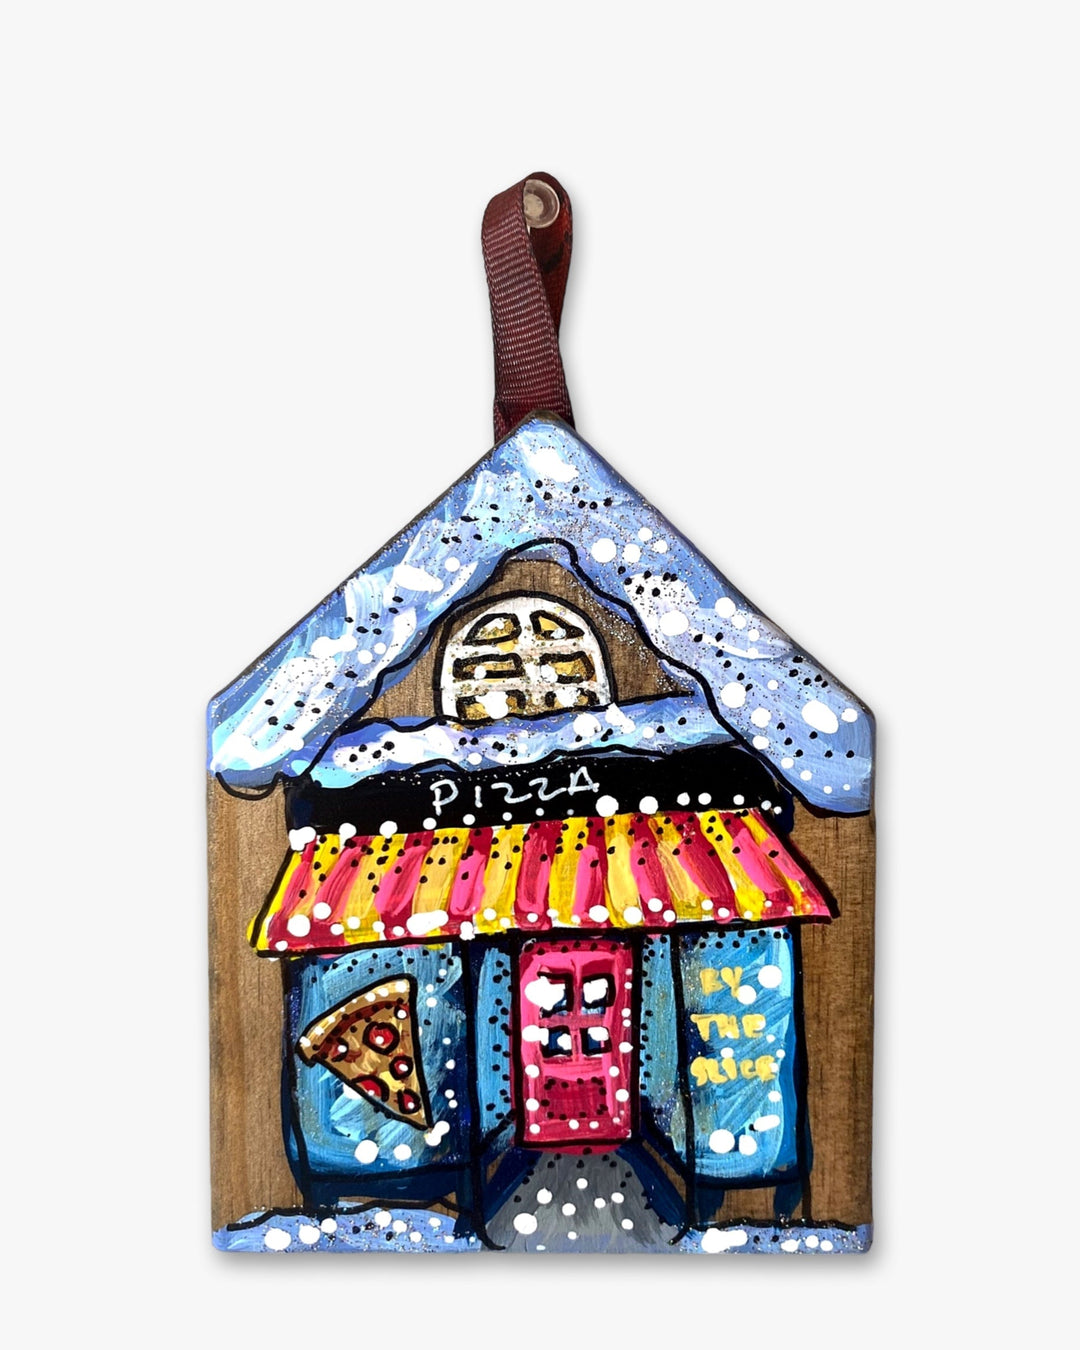 Pizza Palace - Hand Painted Ornament - Heather Freitas 